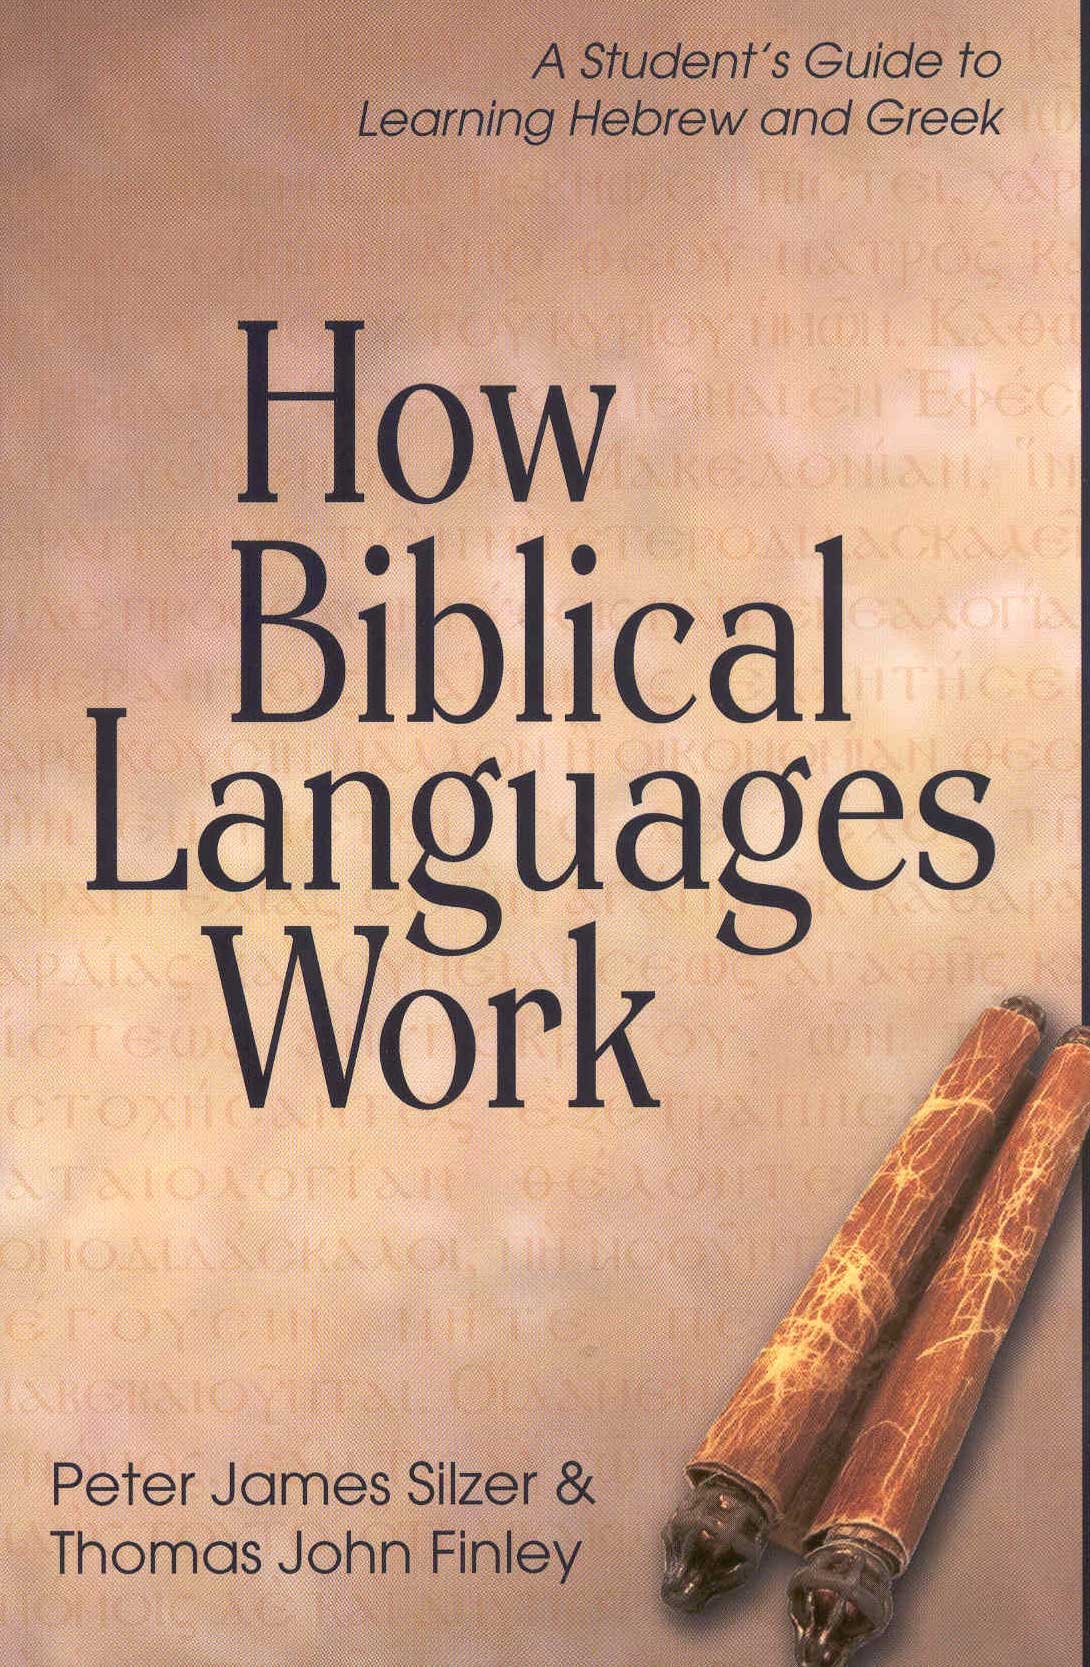 How to Learn Biblical Languages